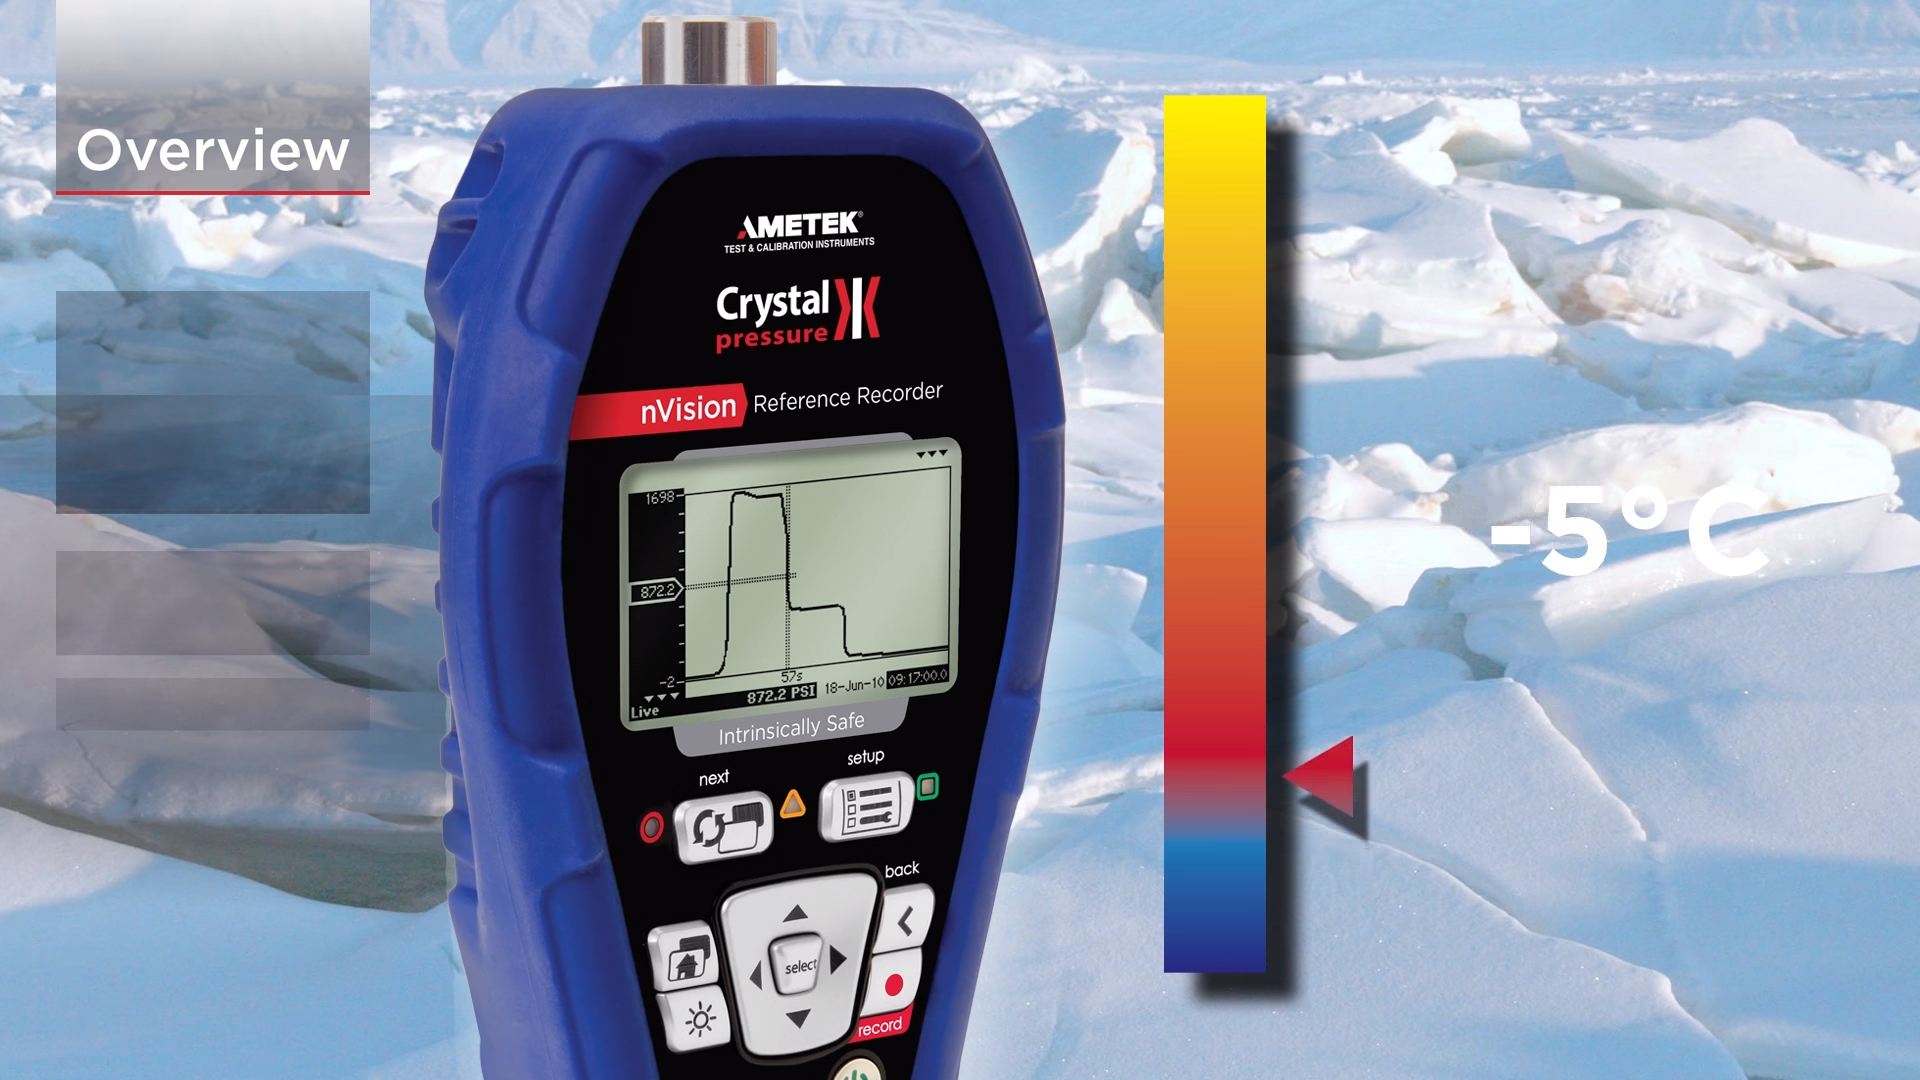 Ametek Crystal nVision Reference Recorder working in cold temperature.